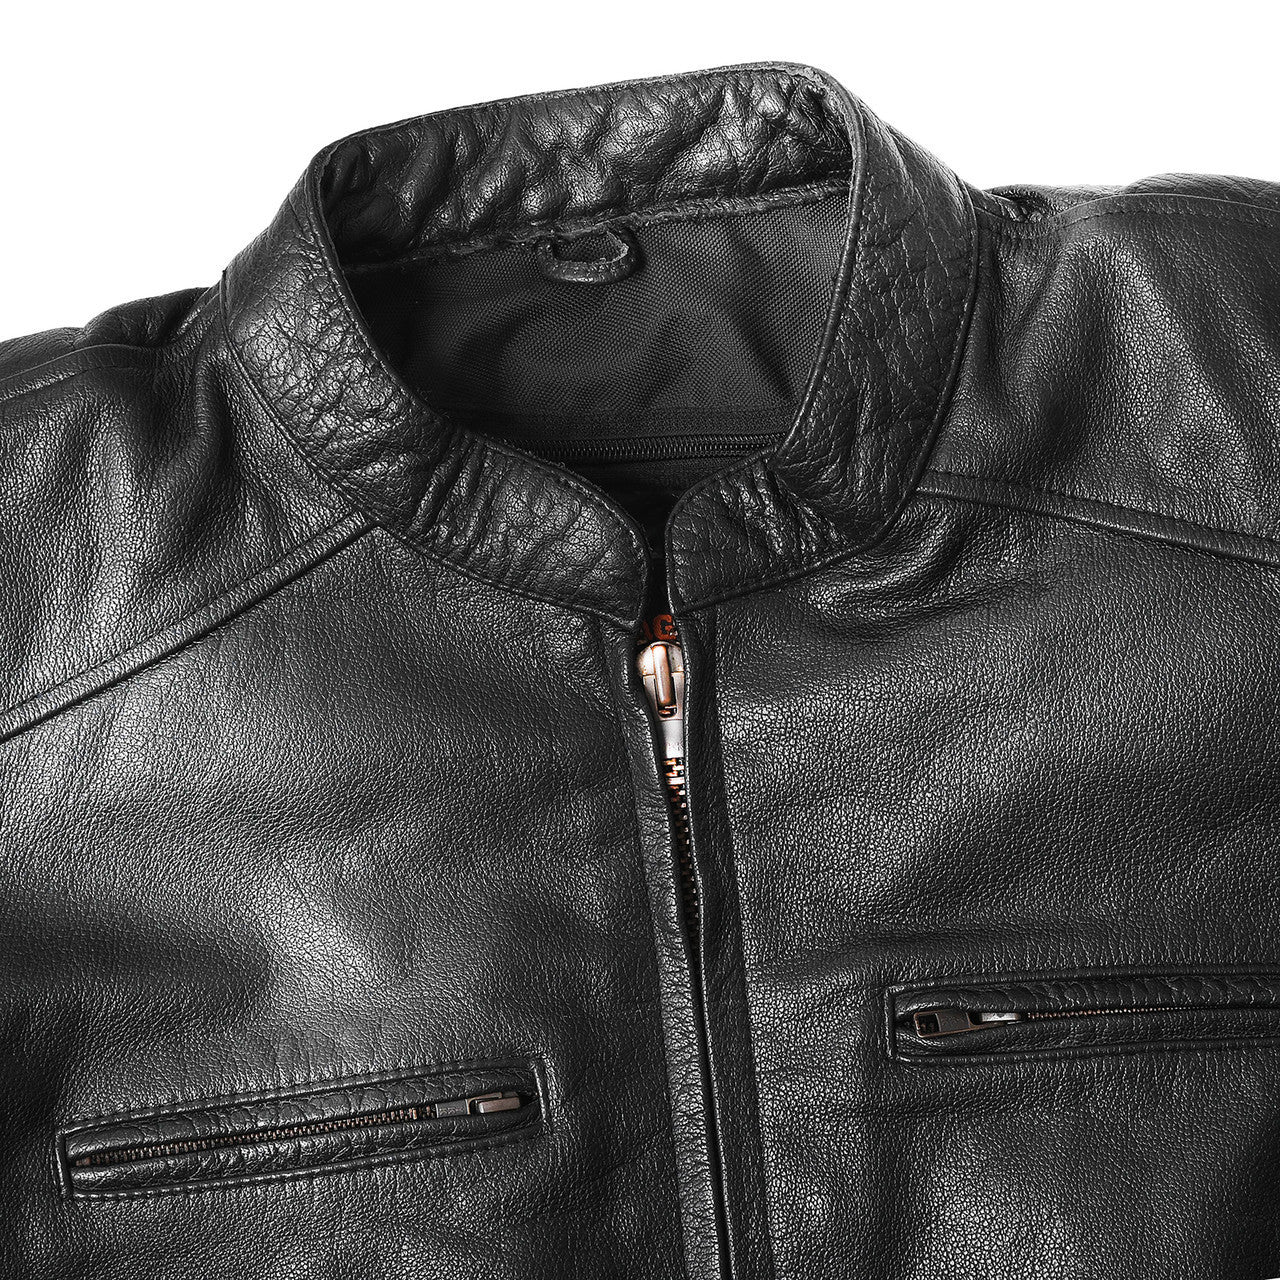 High Mileage HMM538 Mens Dual Conceal Carry Vented Sport Style Cowhide Leather Biker Motorcycle Riding Jacket - feature 4